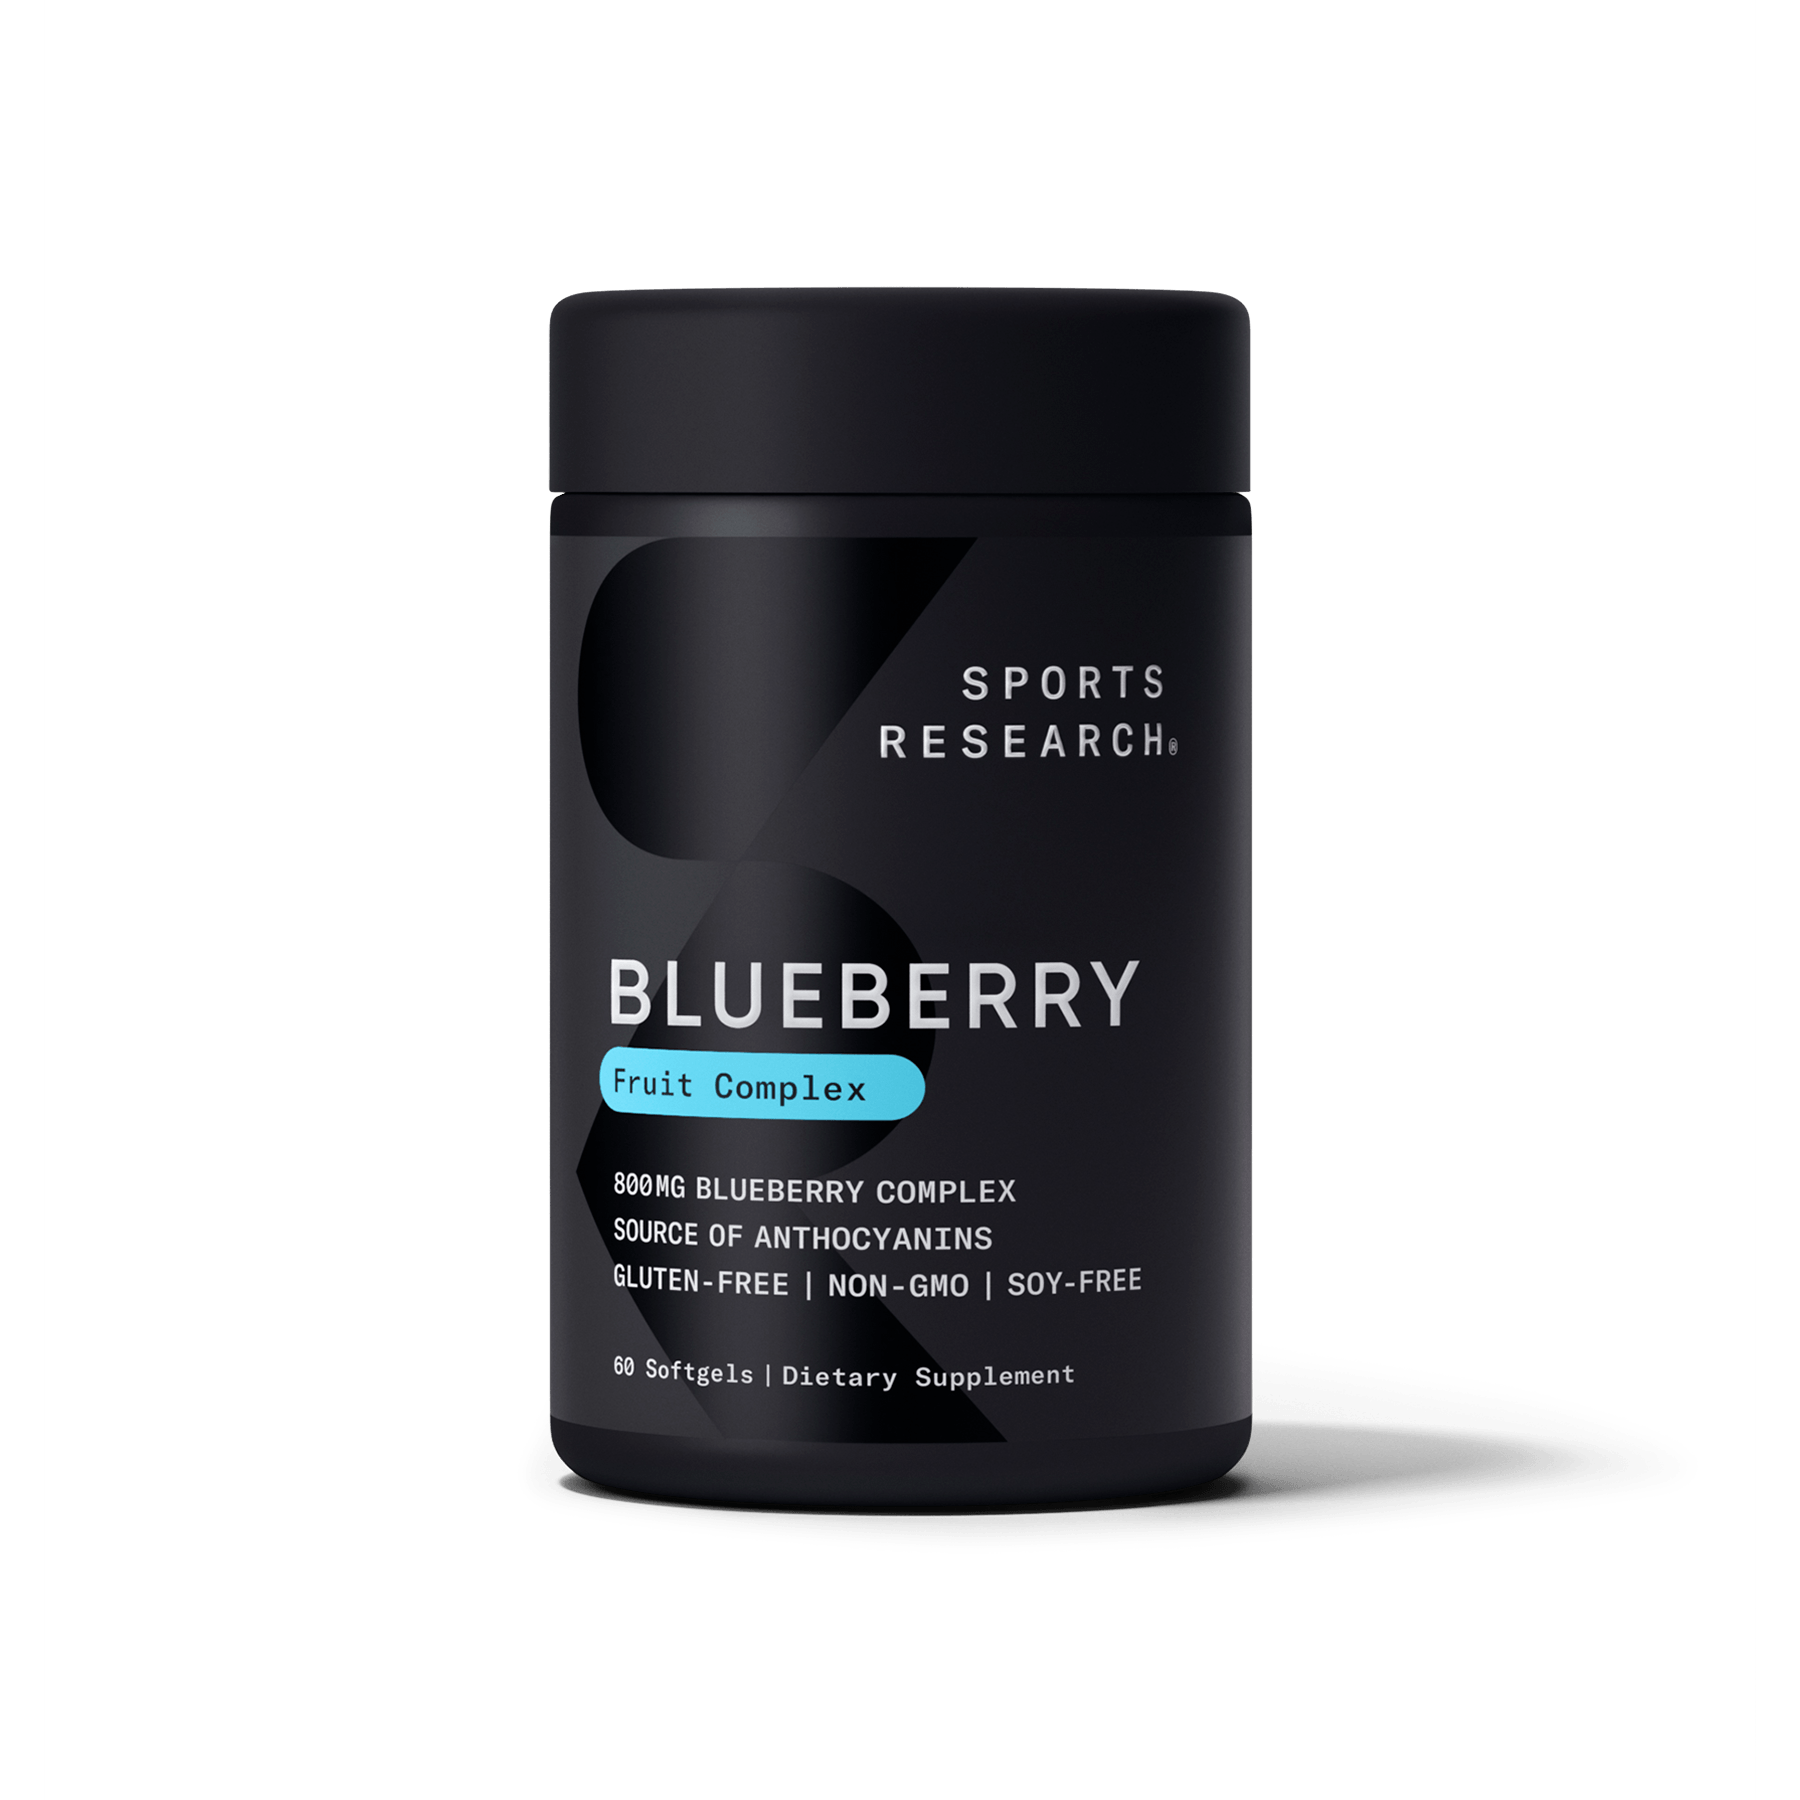 Sports Research Blueberry Fruit Complex.